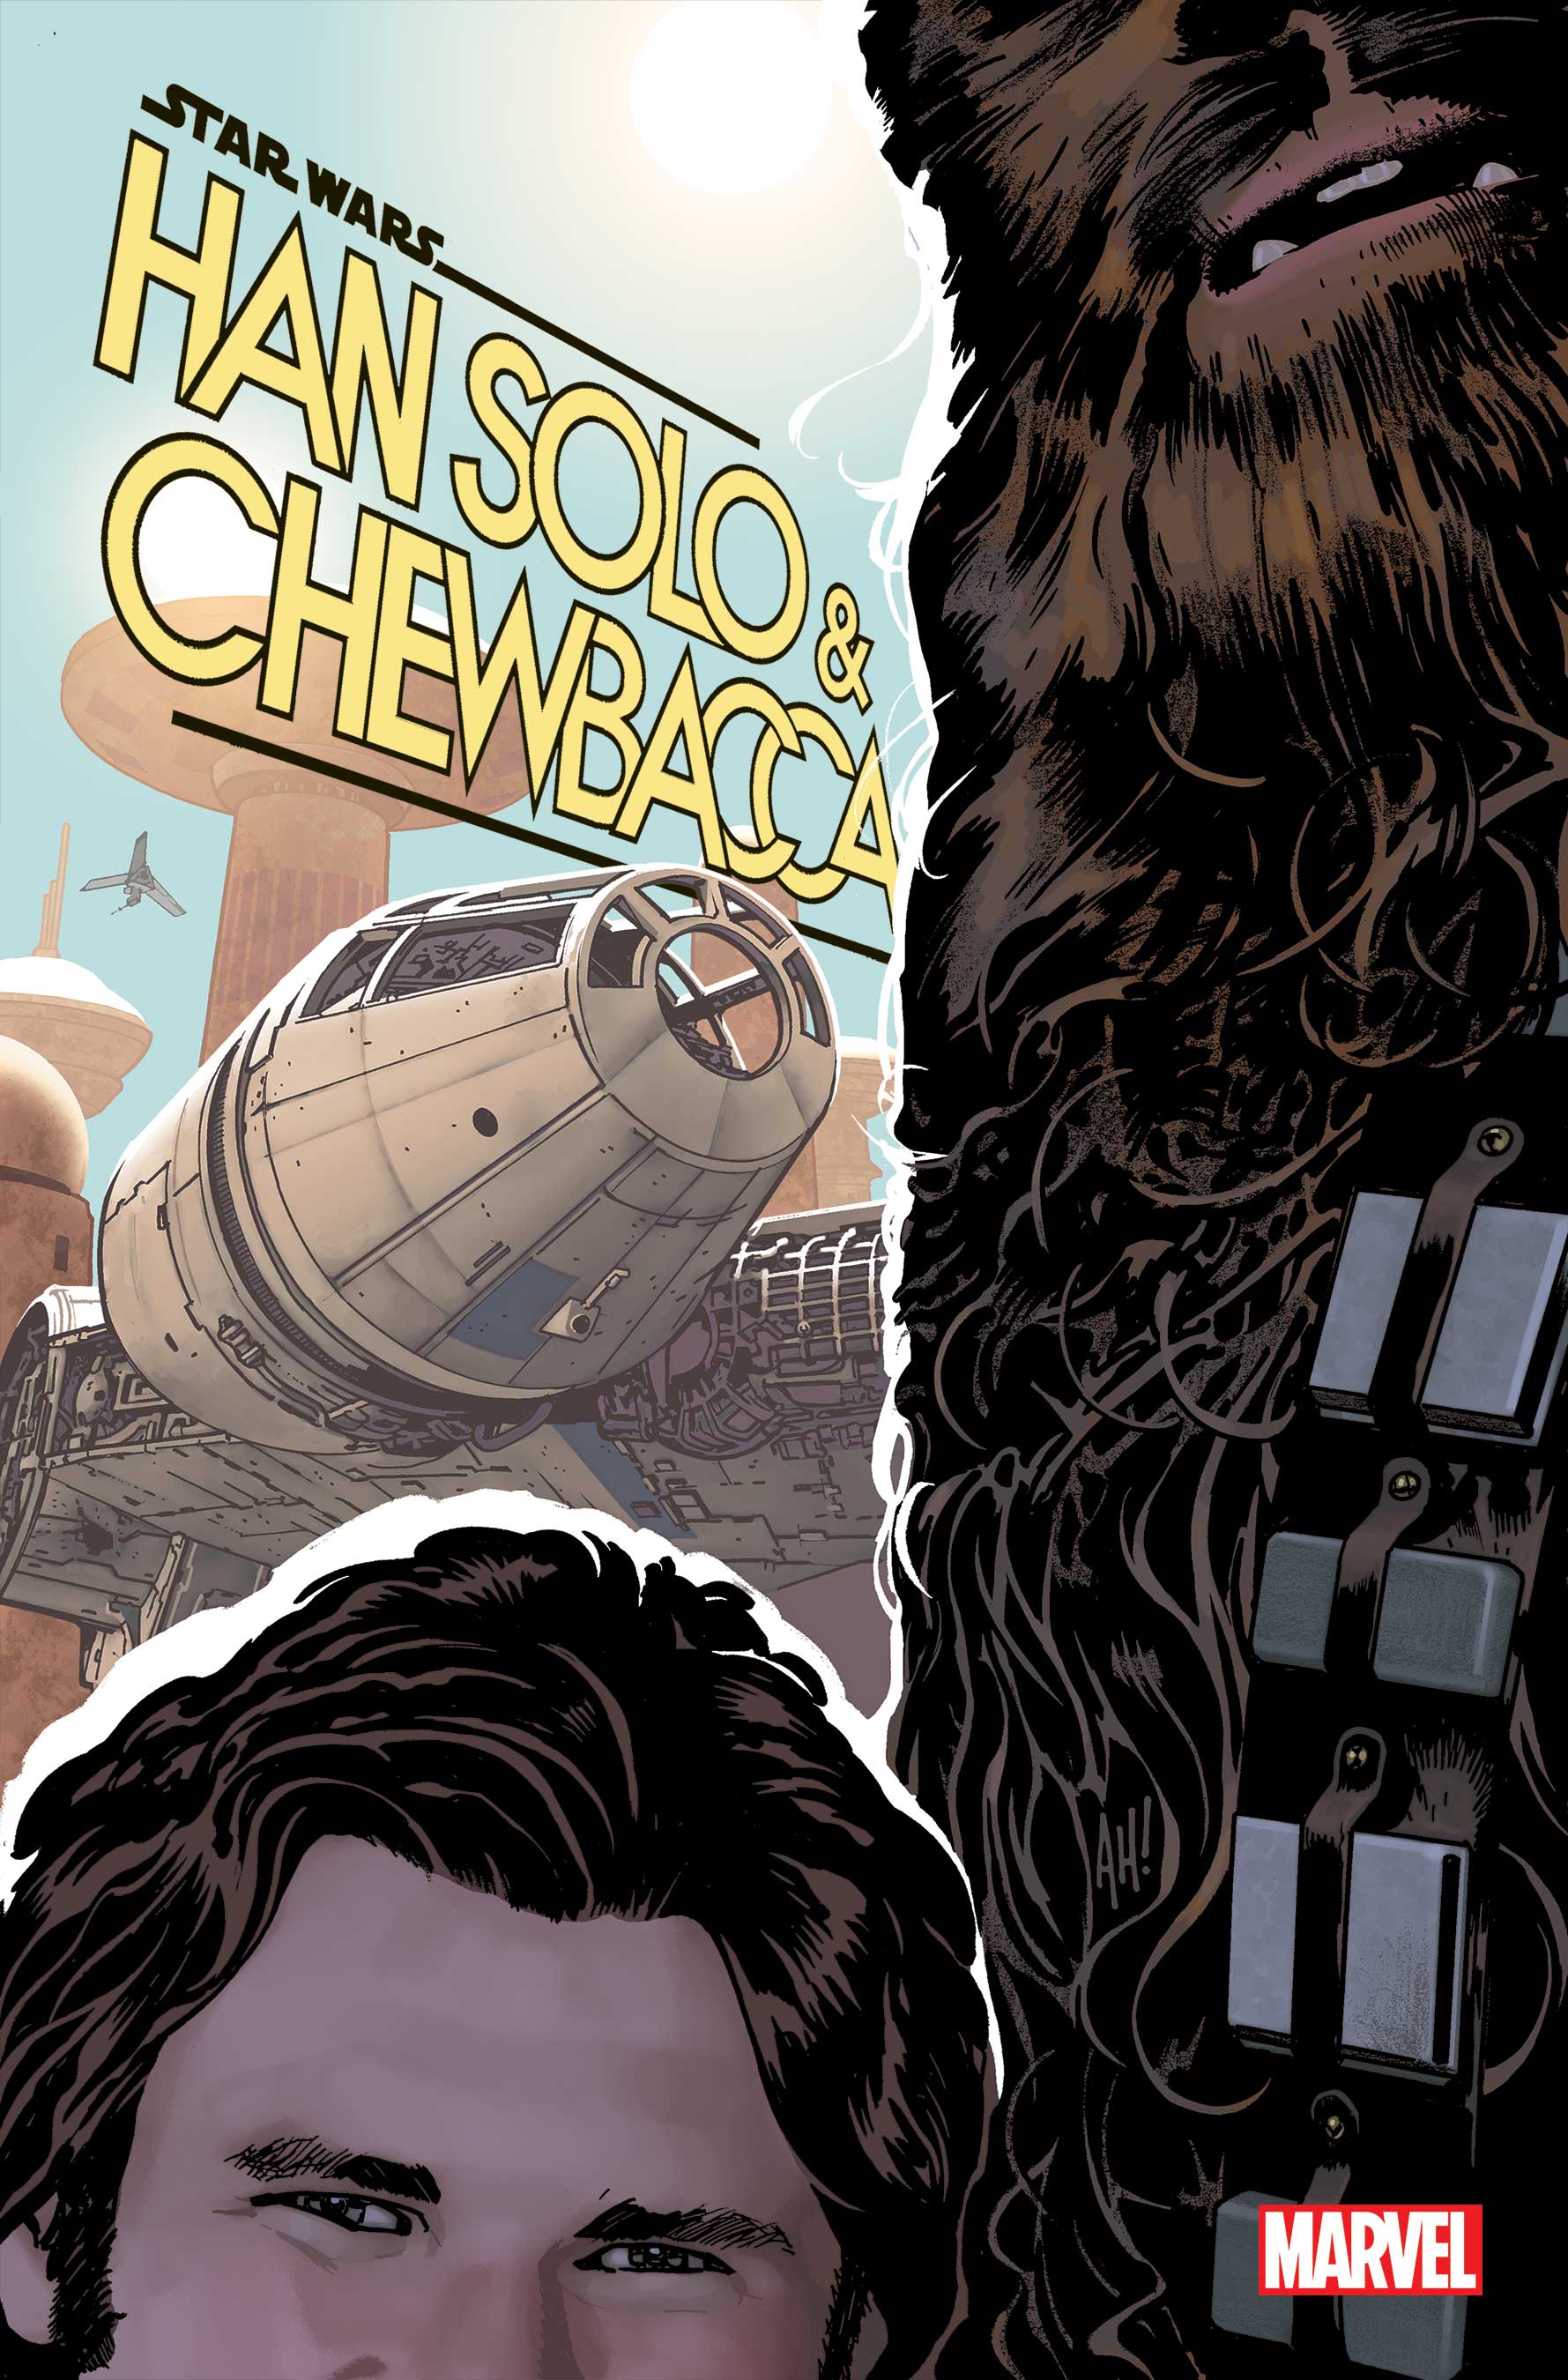 Star Wars: Han Solo & Chewbacca (2022) #2 (Variant)